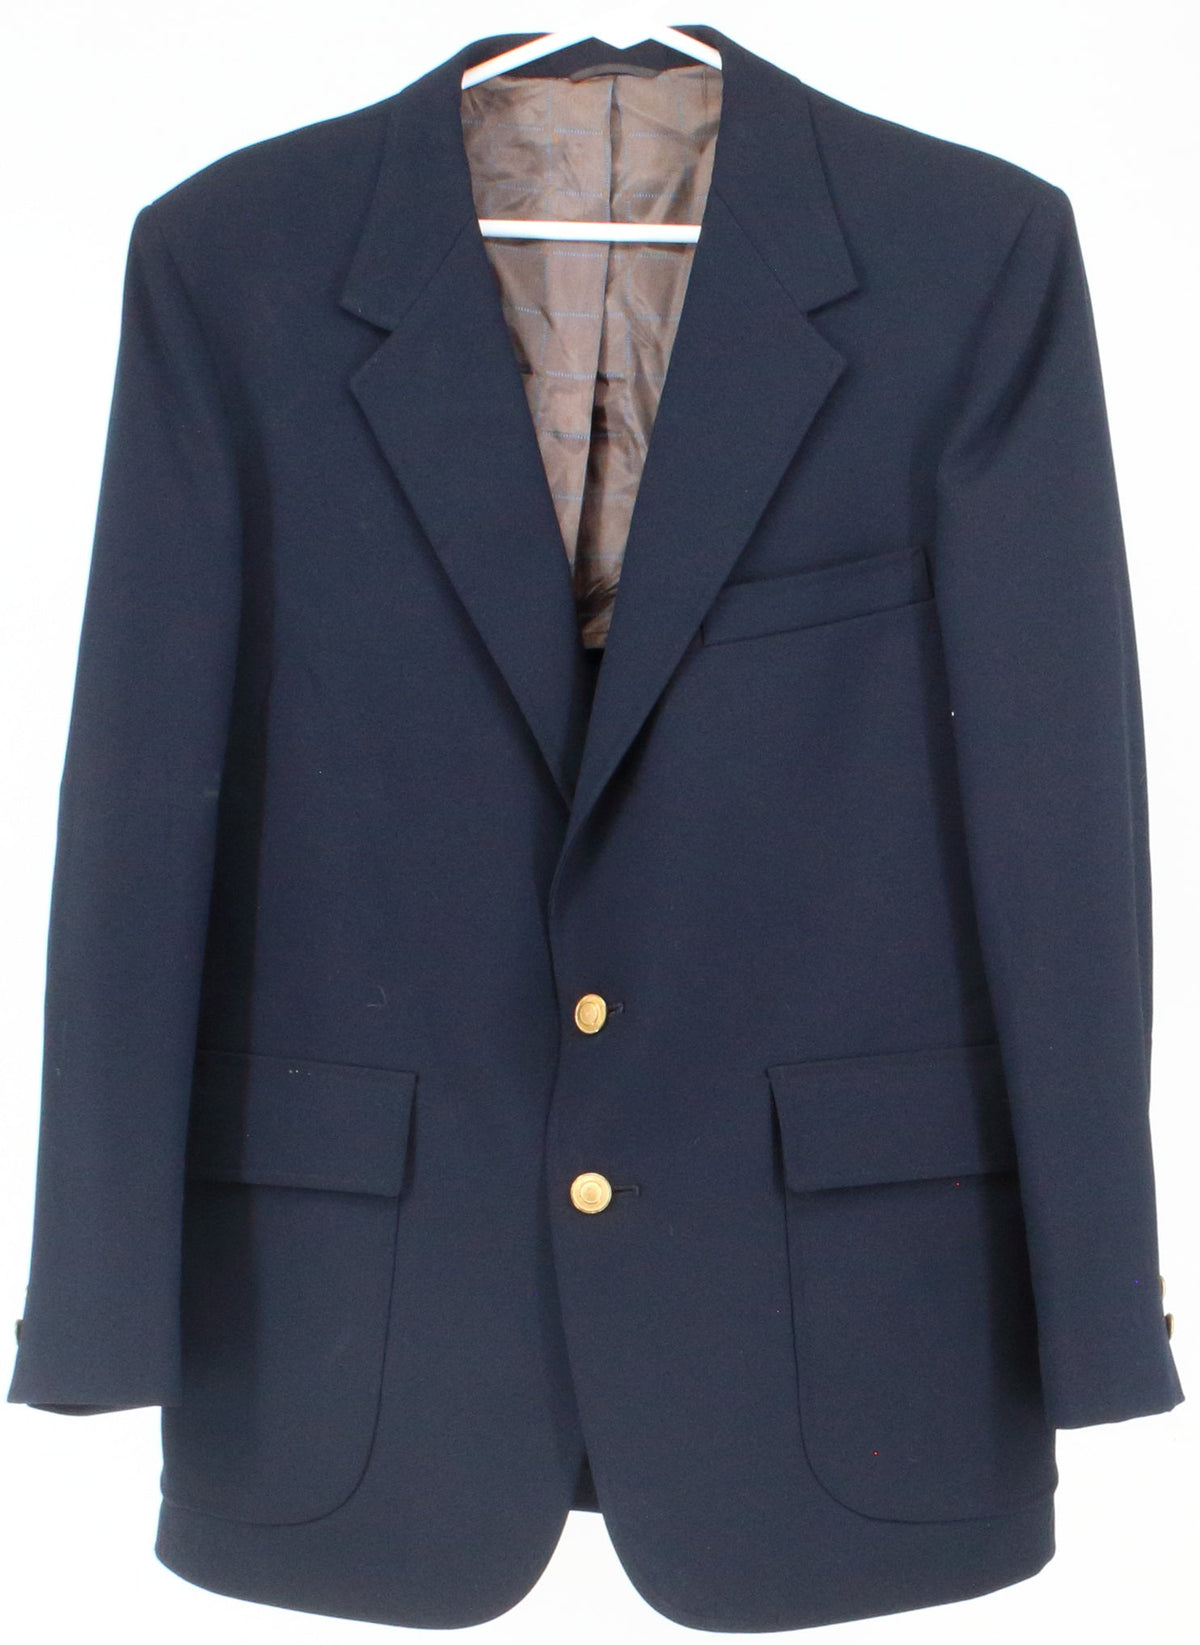 The Classic Collection Navy Blue Men's Blazer